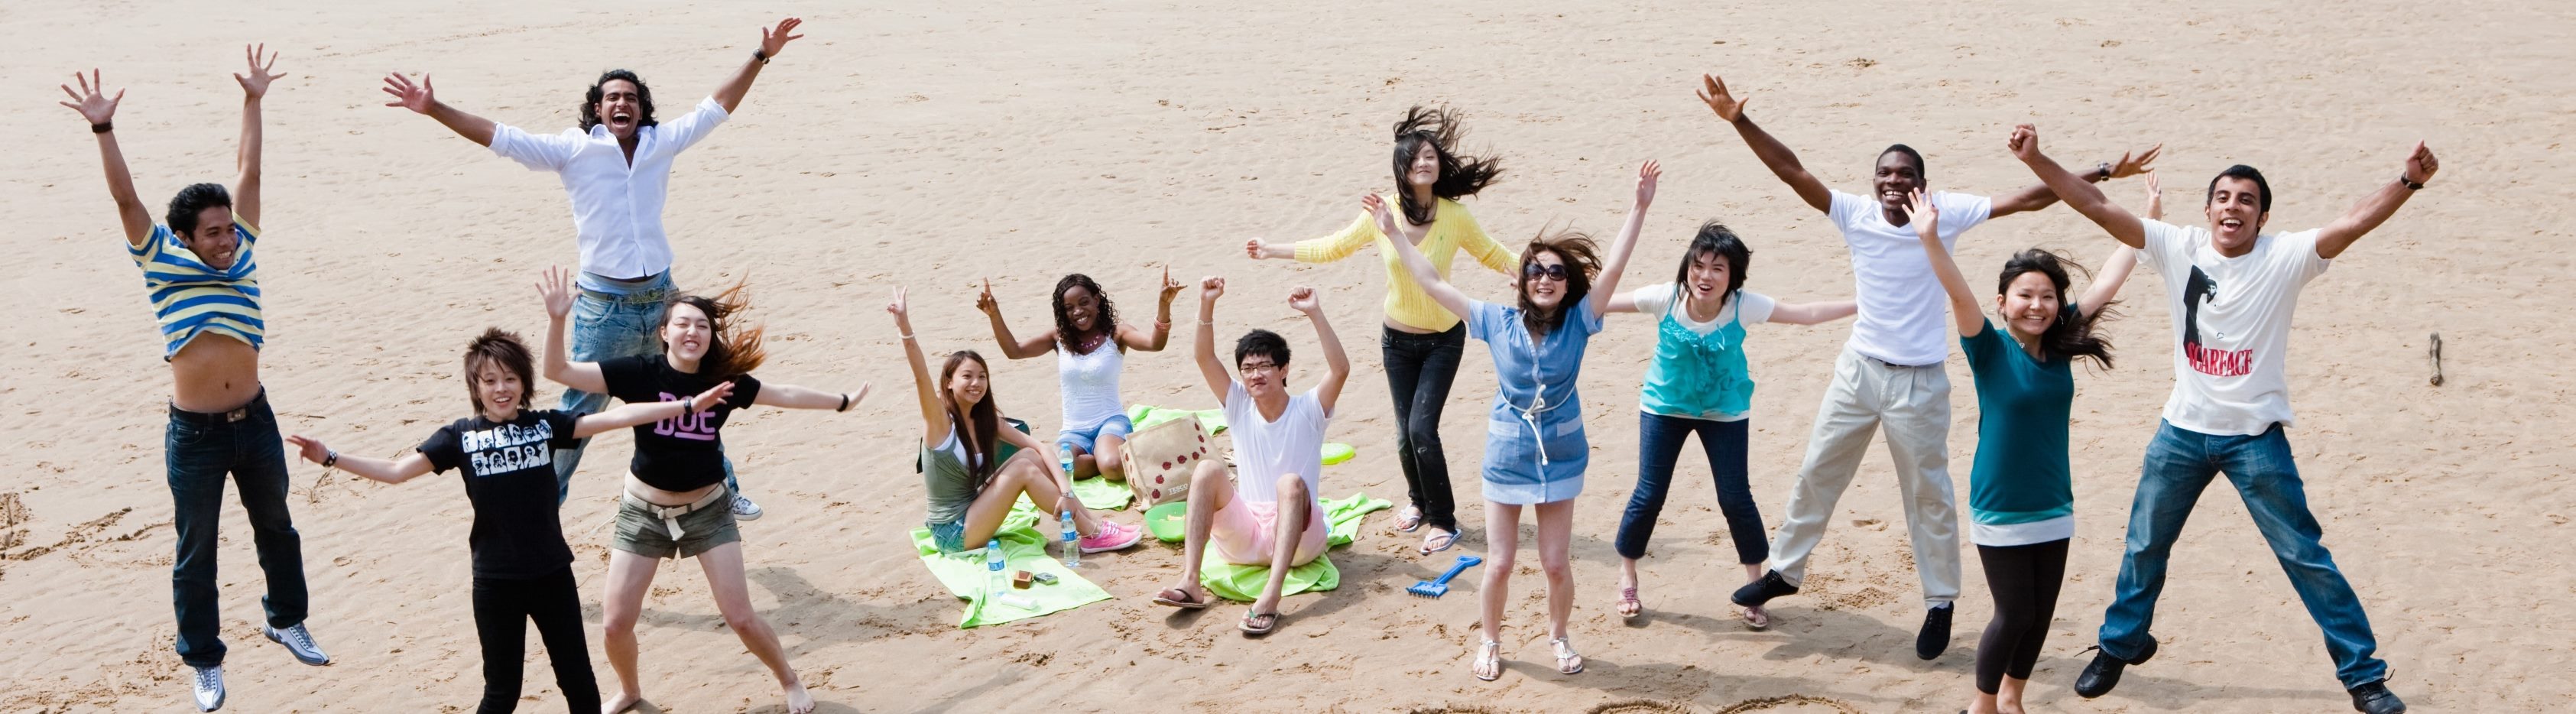 Photograph of students jumping in the air on Swansea Bay beach.